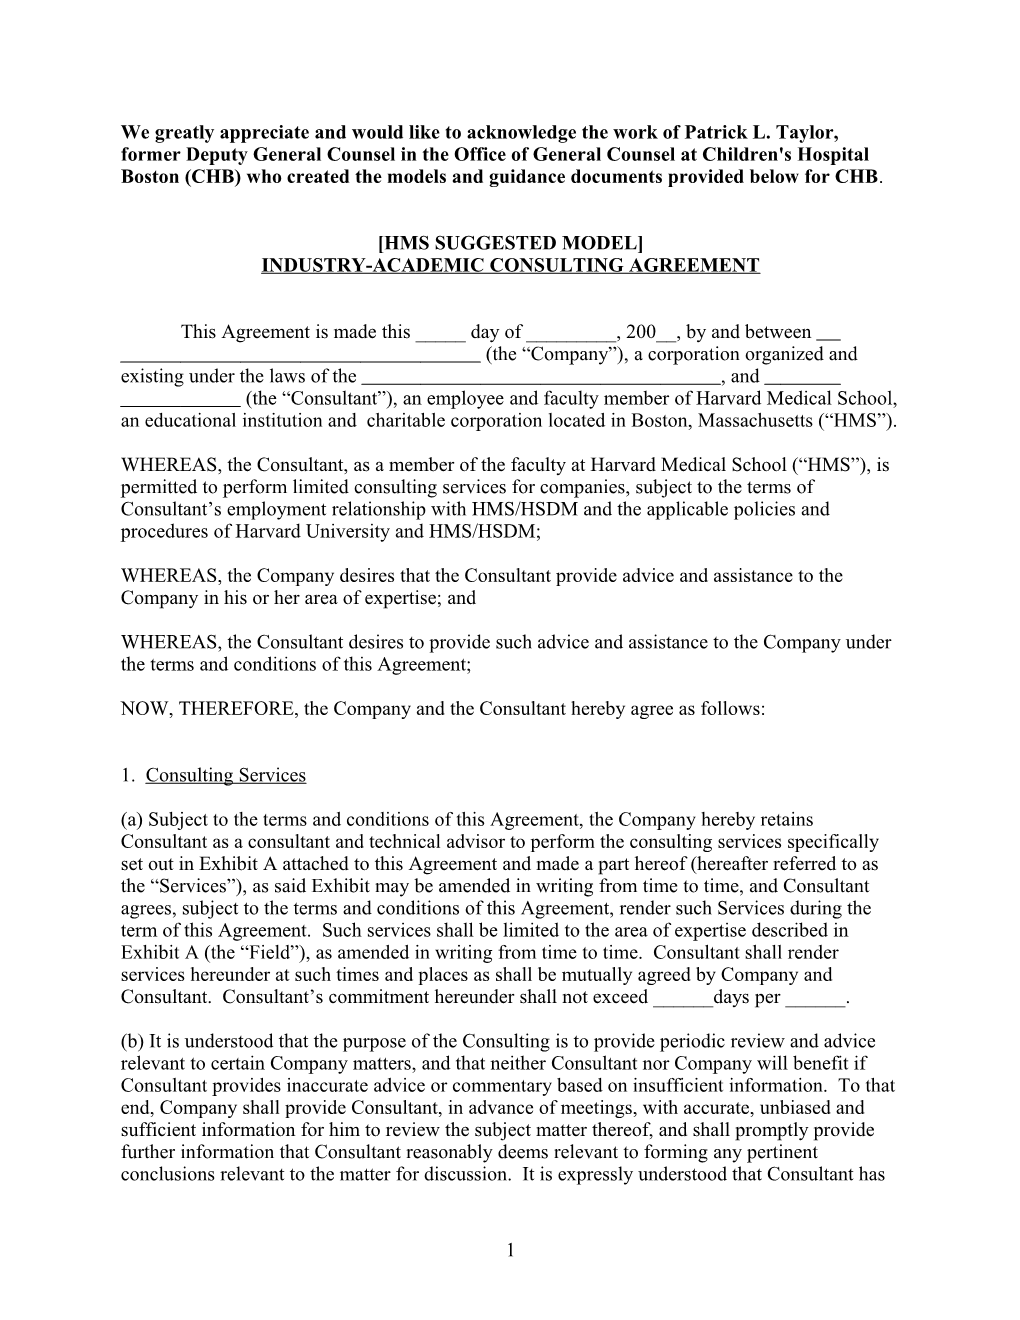 CONSULTING AGREEMENT Template